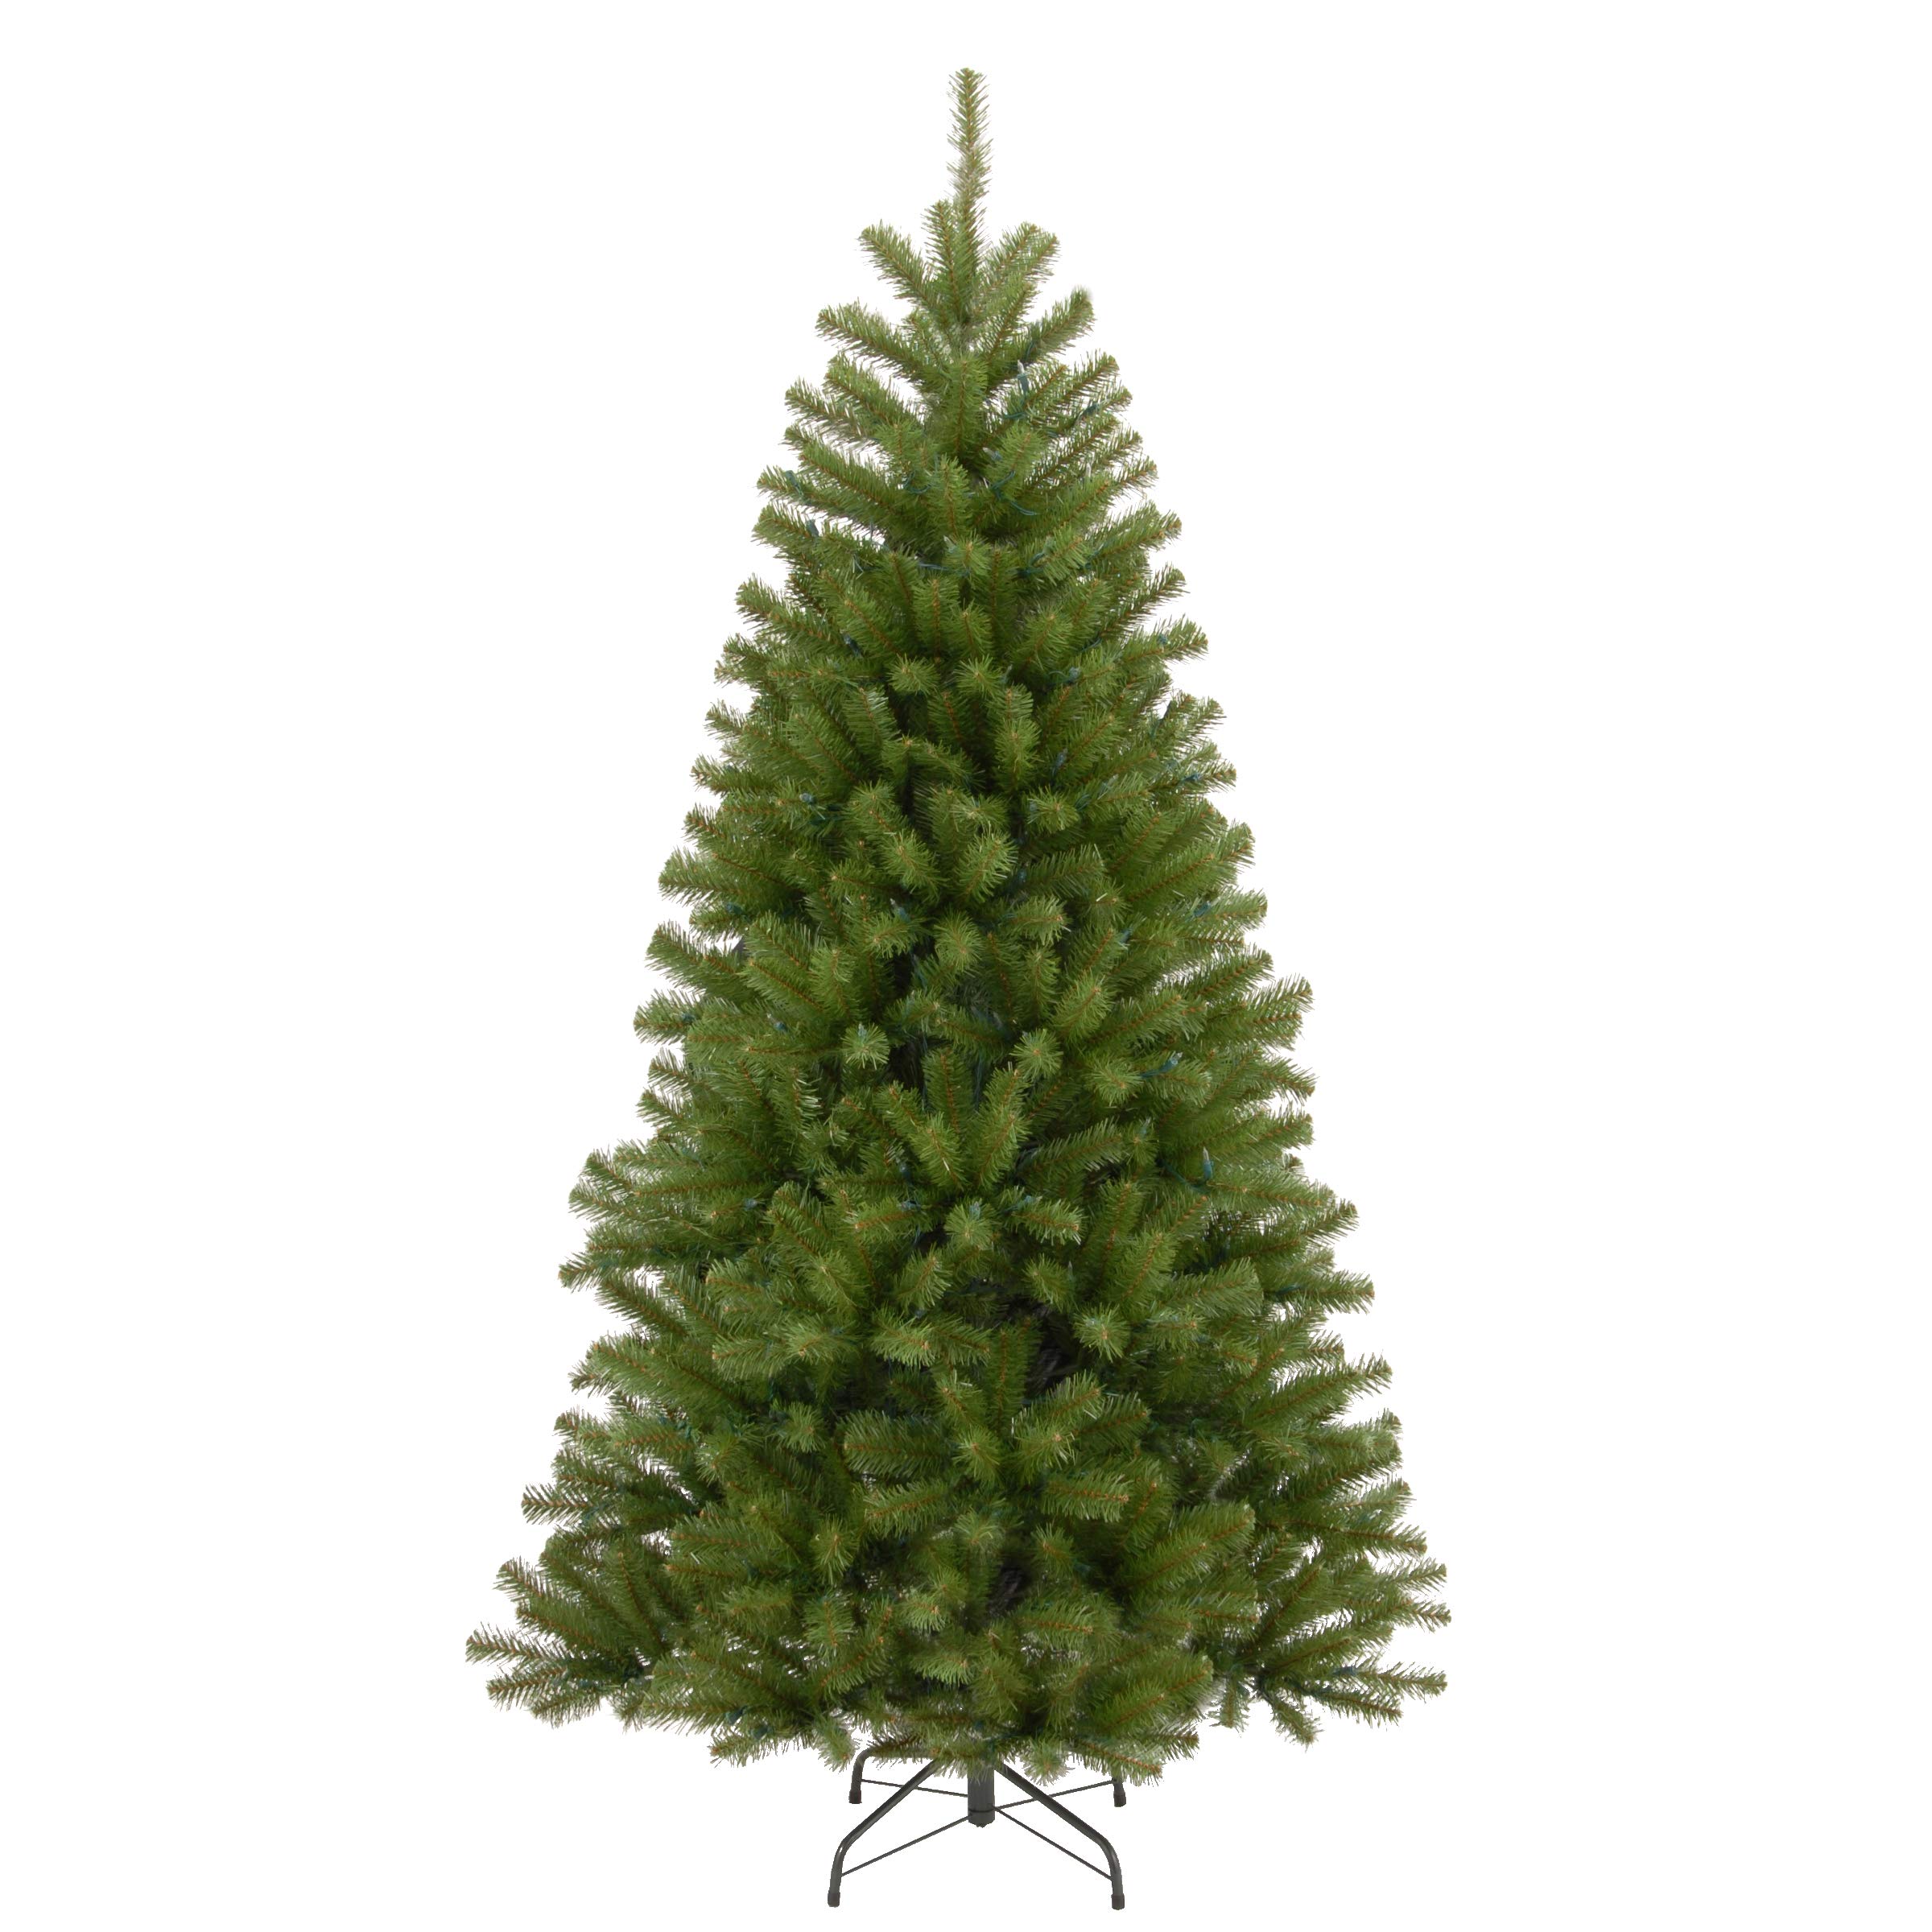 National Tree Company Artificial Full Christmas Tree, Green, North Valley Spruce, Includes Stand, 7.5 Feet